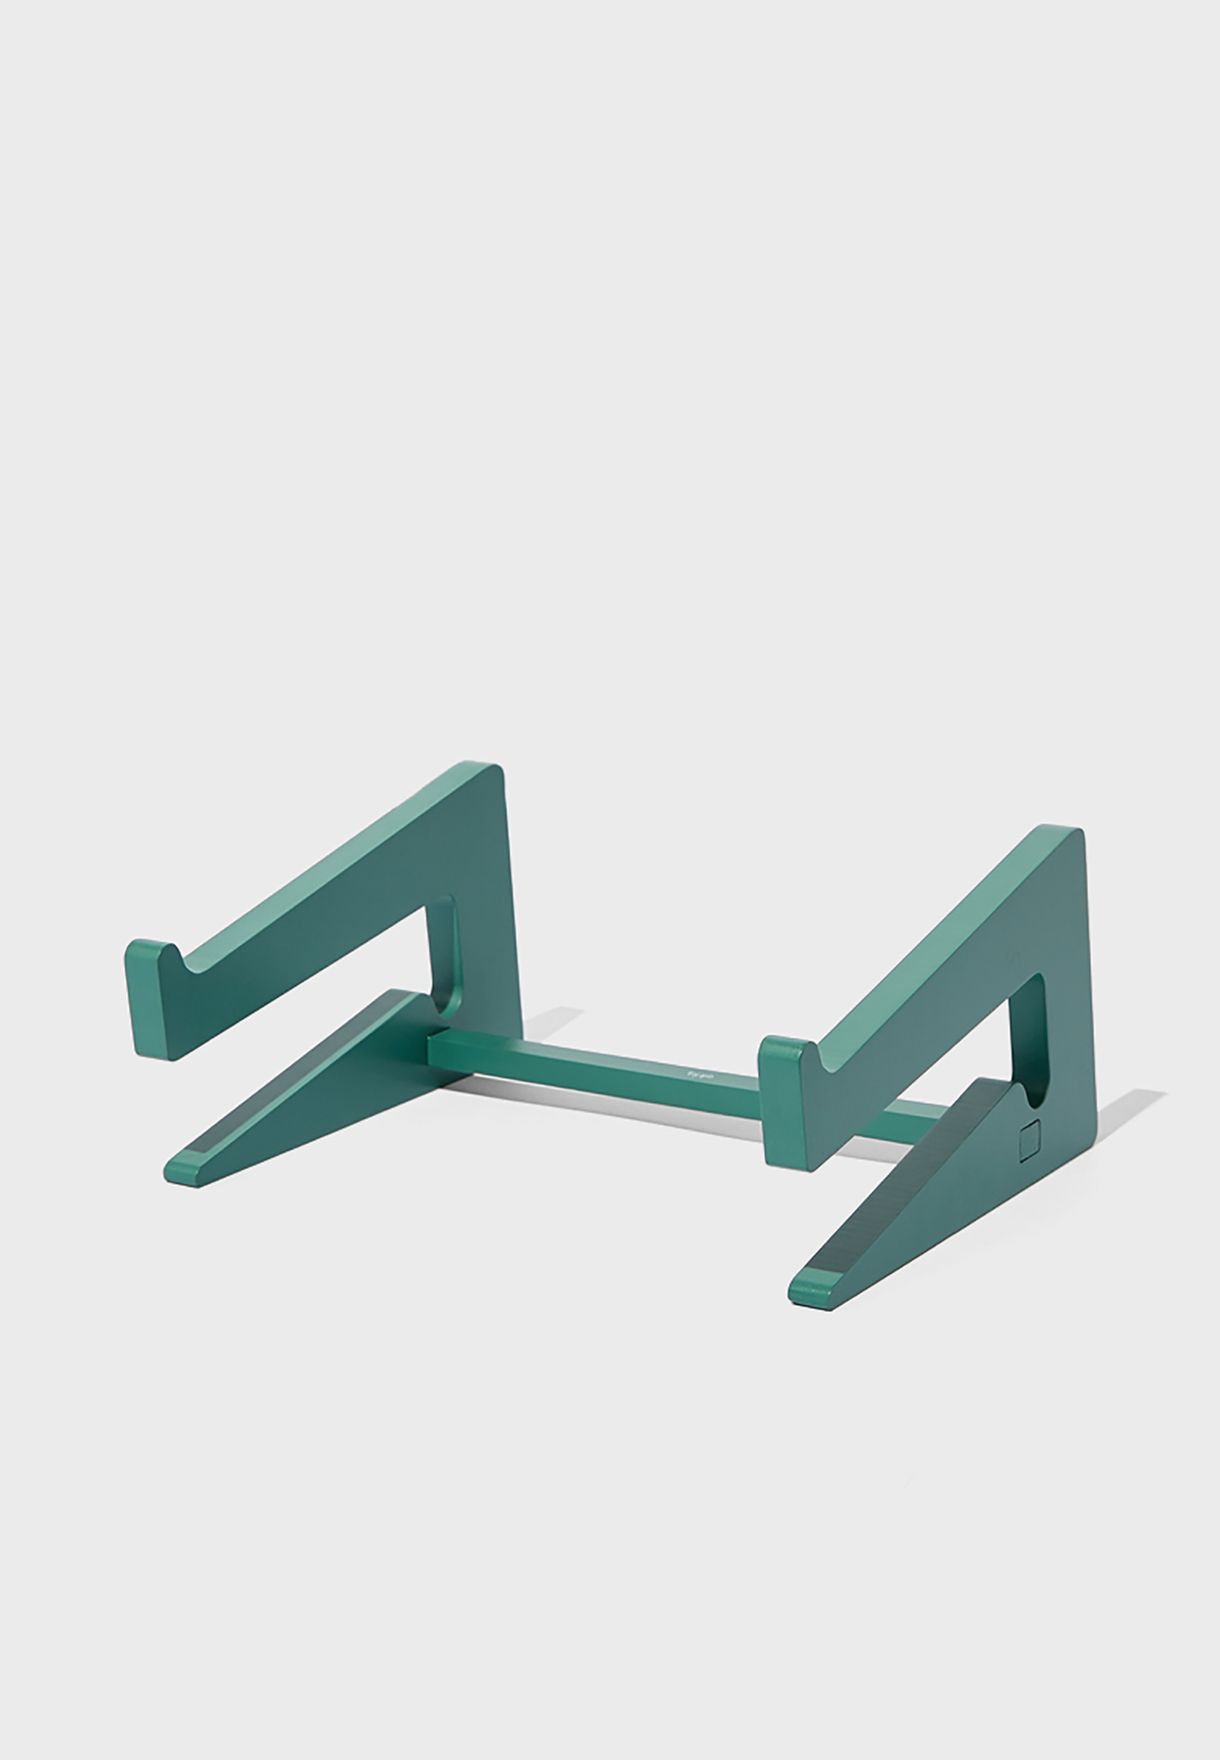 Basil Collapsible Laptop Stand